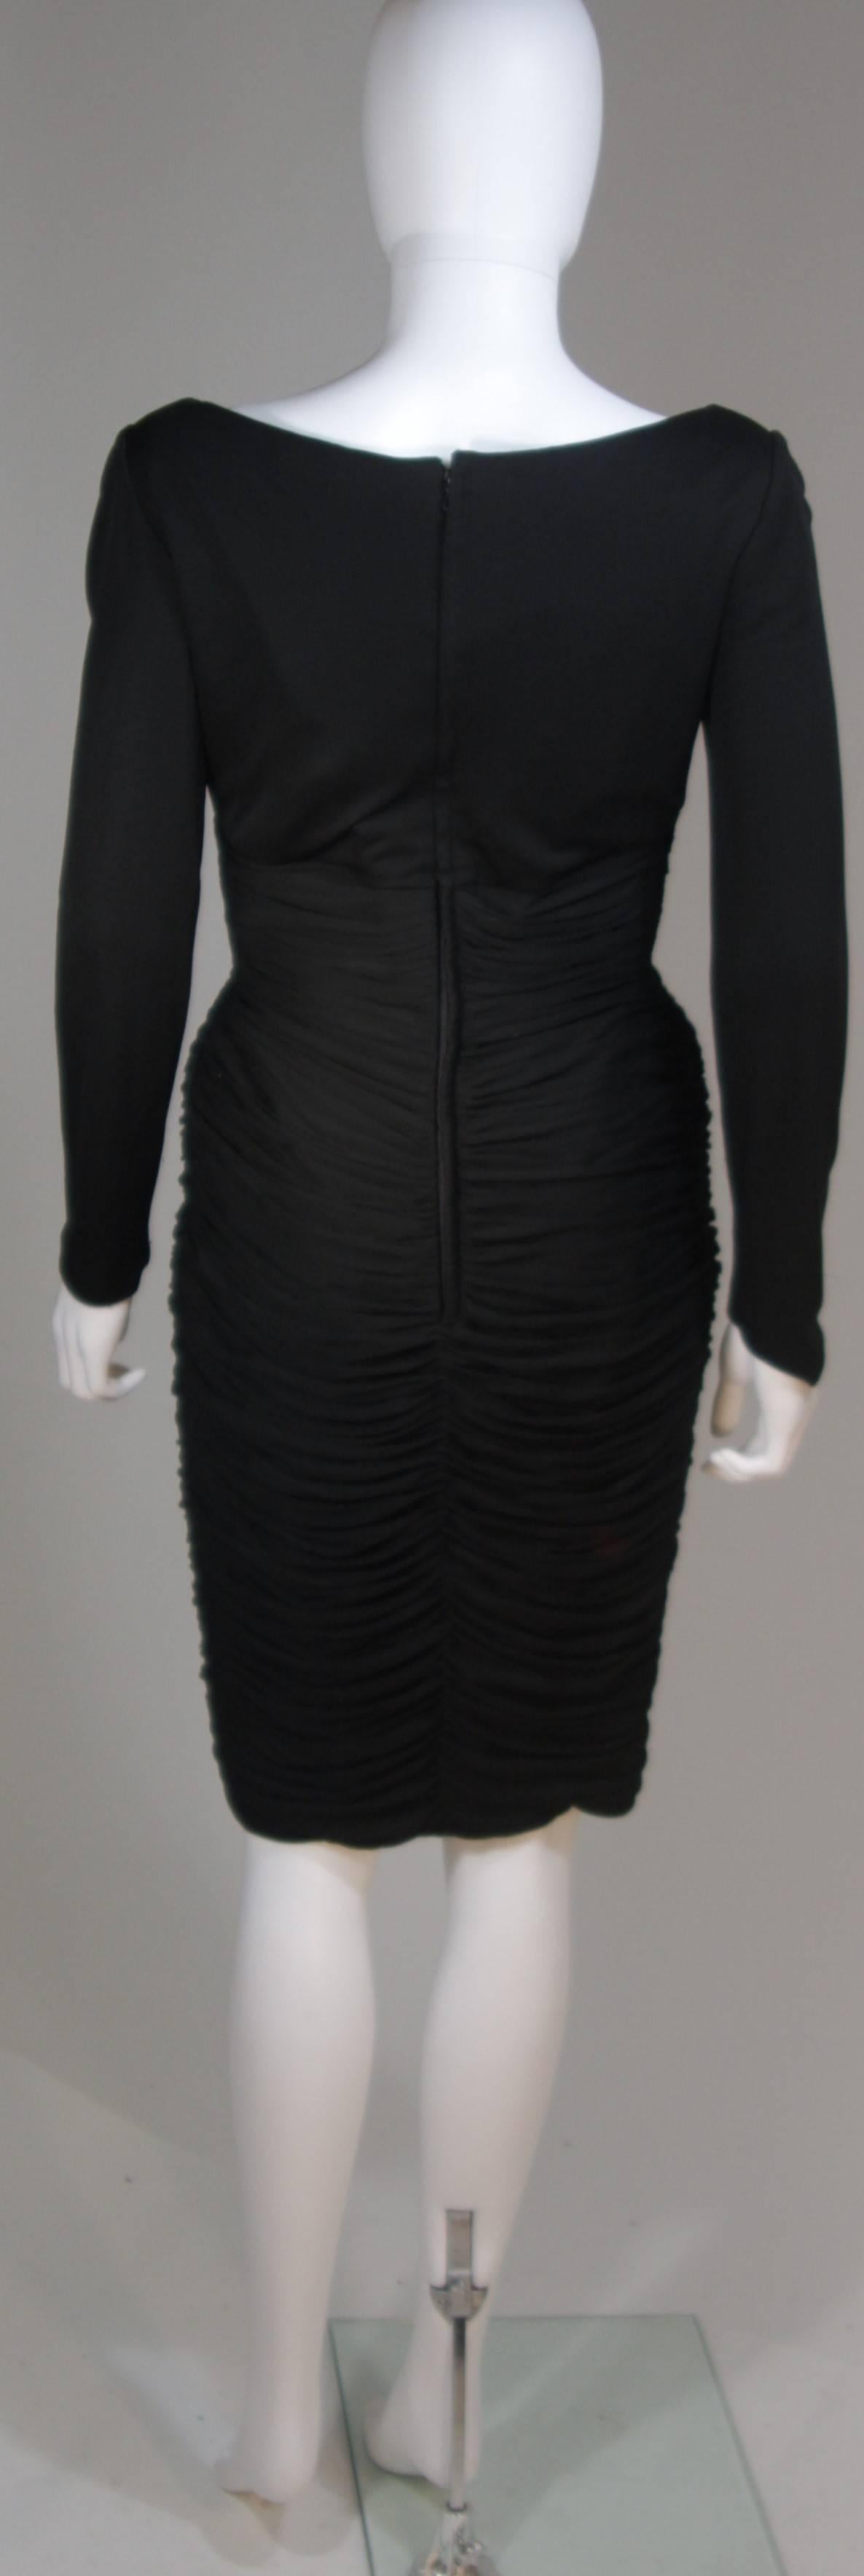 VICKY TIEL Black Long Sleeve Rouched Jersey Cocktail Dress Size 4-6 For Sale 4